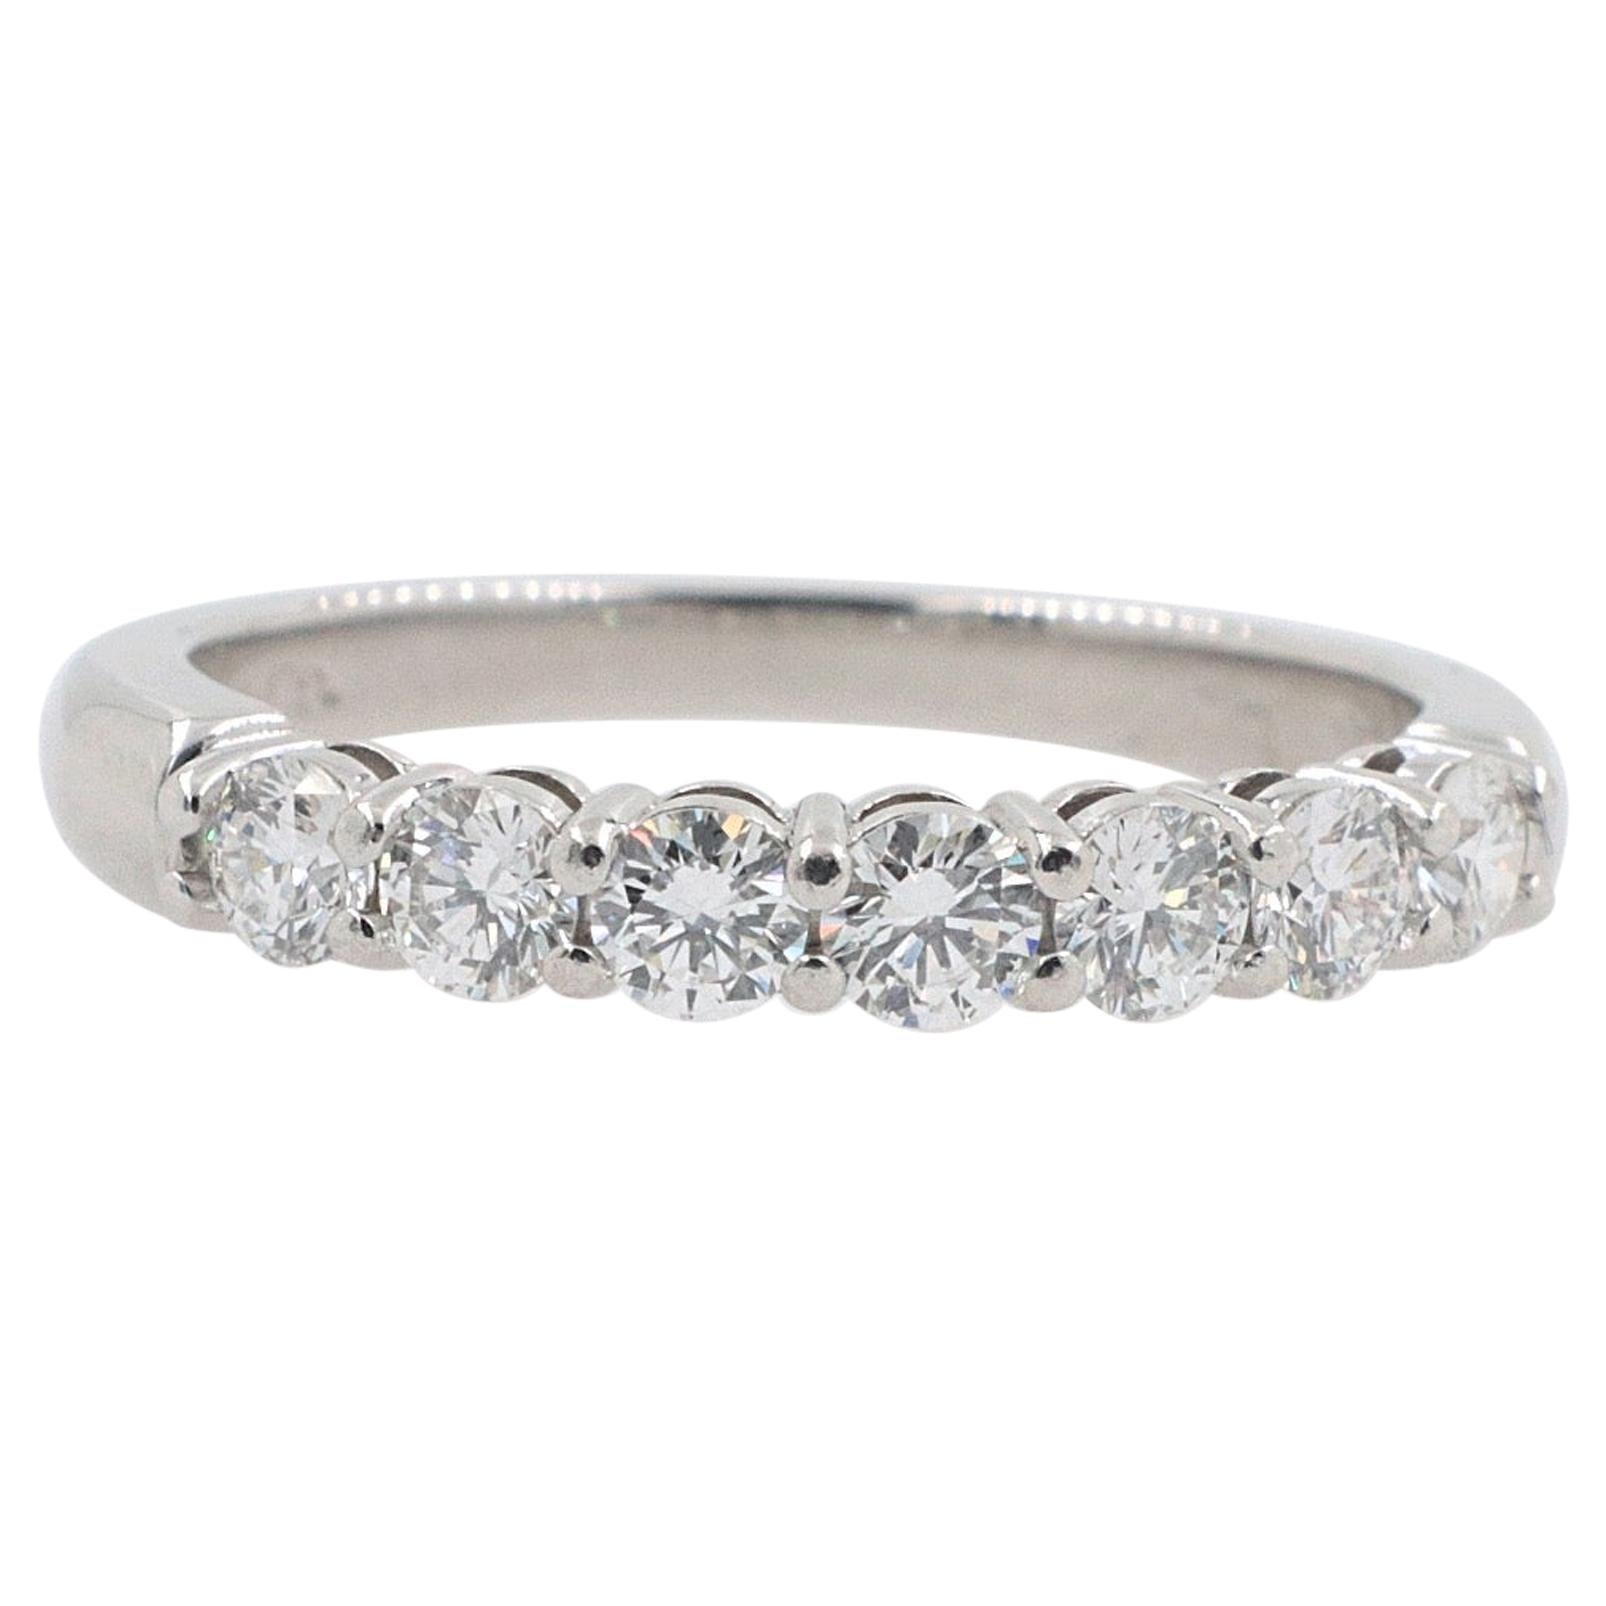 Tiffany & Co. Embrace Diamond 0.57 tcw Shared Prong Band Ring in Platinum